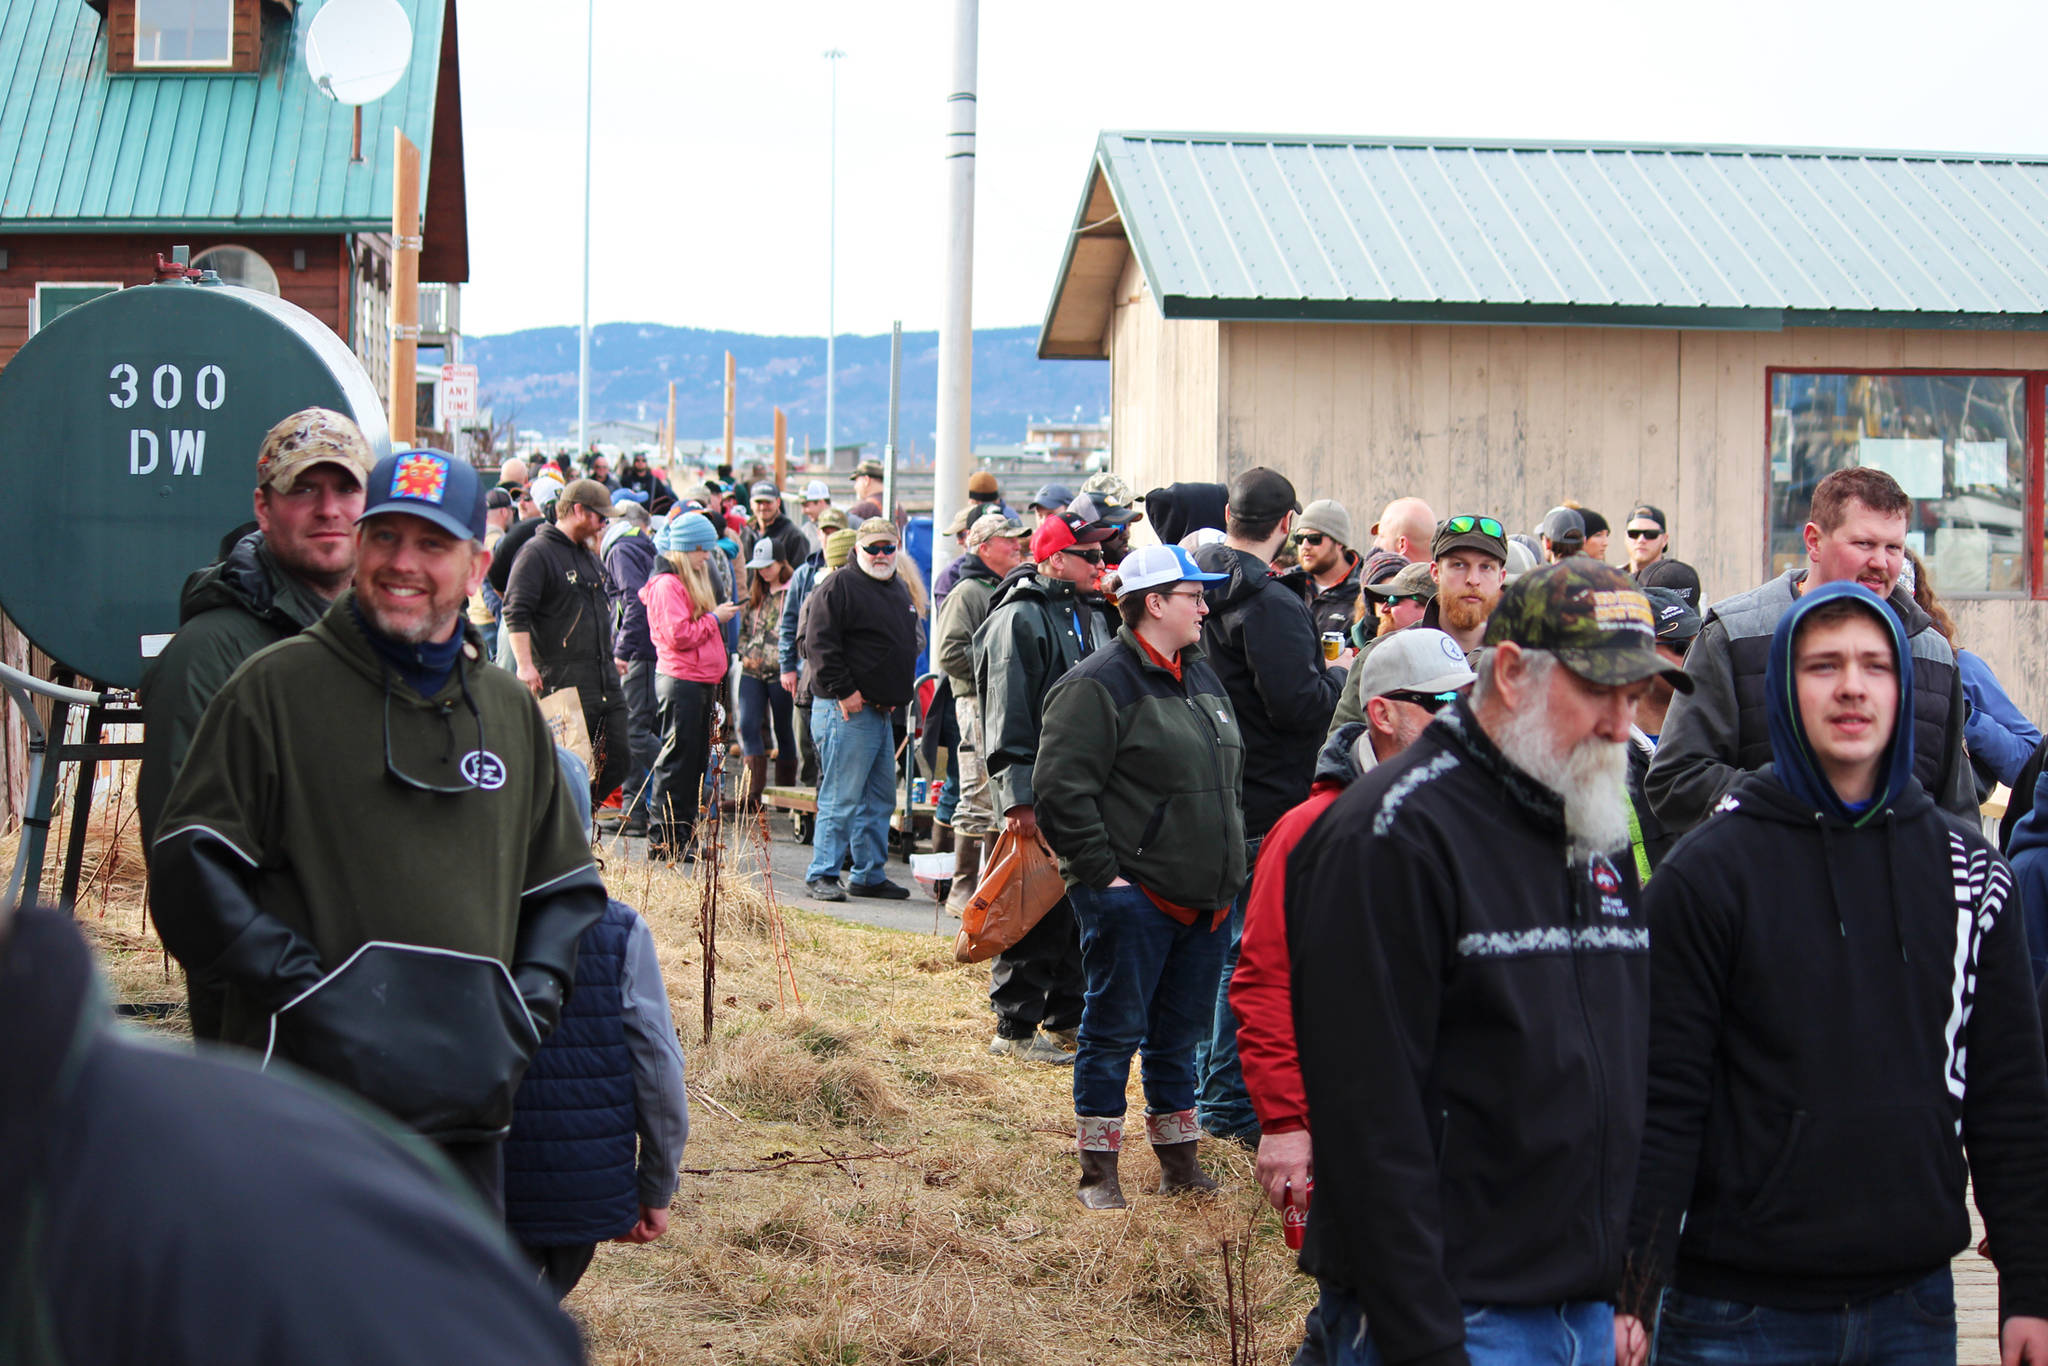 Anglers que up to have their catches weighed at Coal Point Seafoods during the Homer Winter King Salmon Tournament held Saturday, March 23, 2019 in Homer, Alaska. (Photo by Megan Pacer/Homer News)